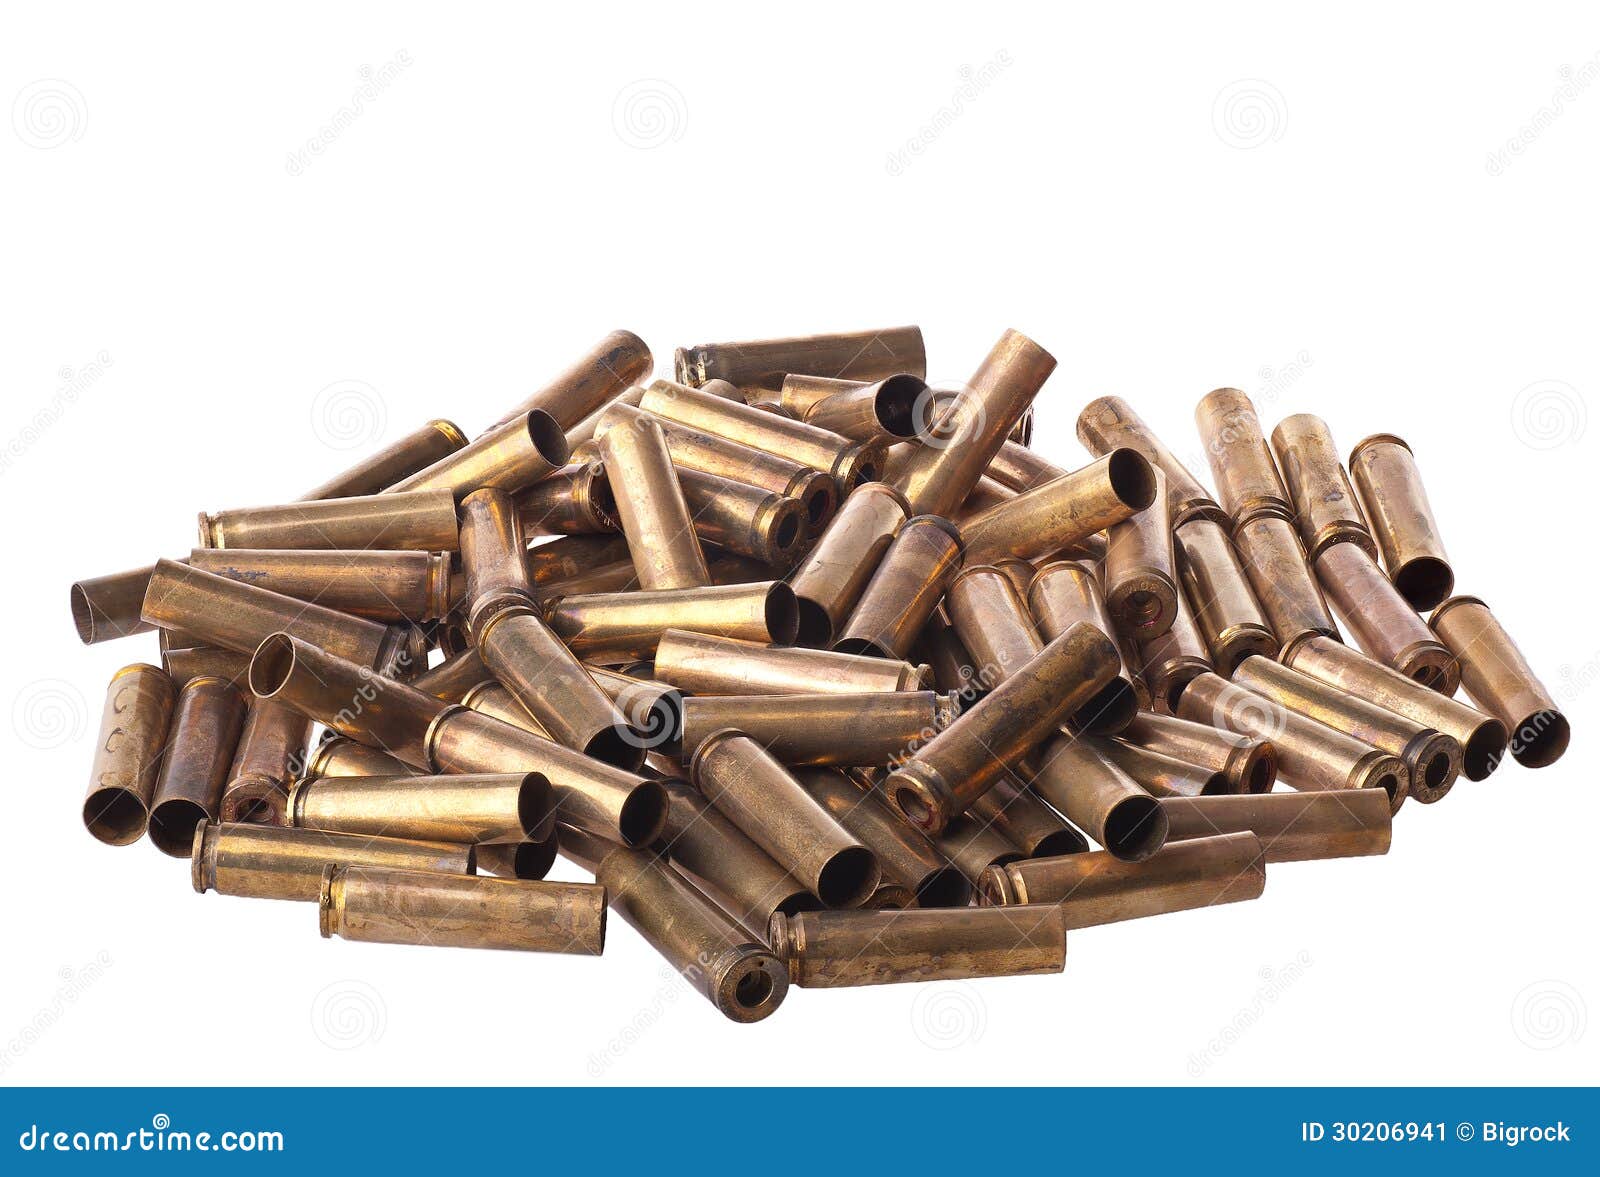 used .30 carbine shell casing